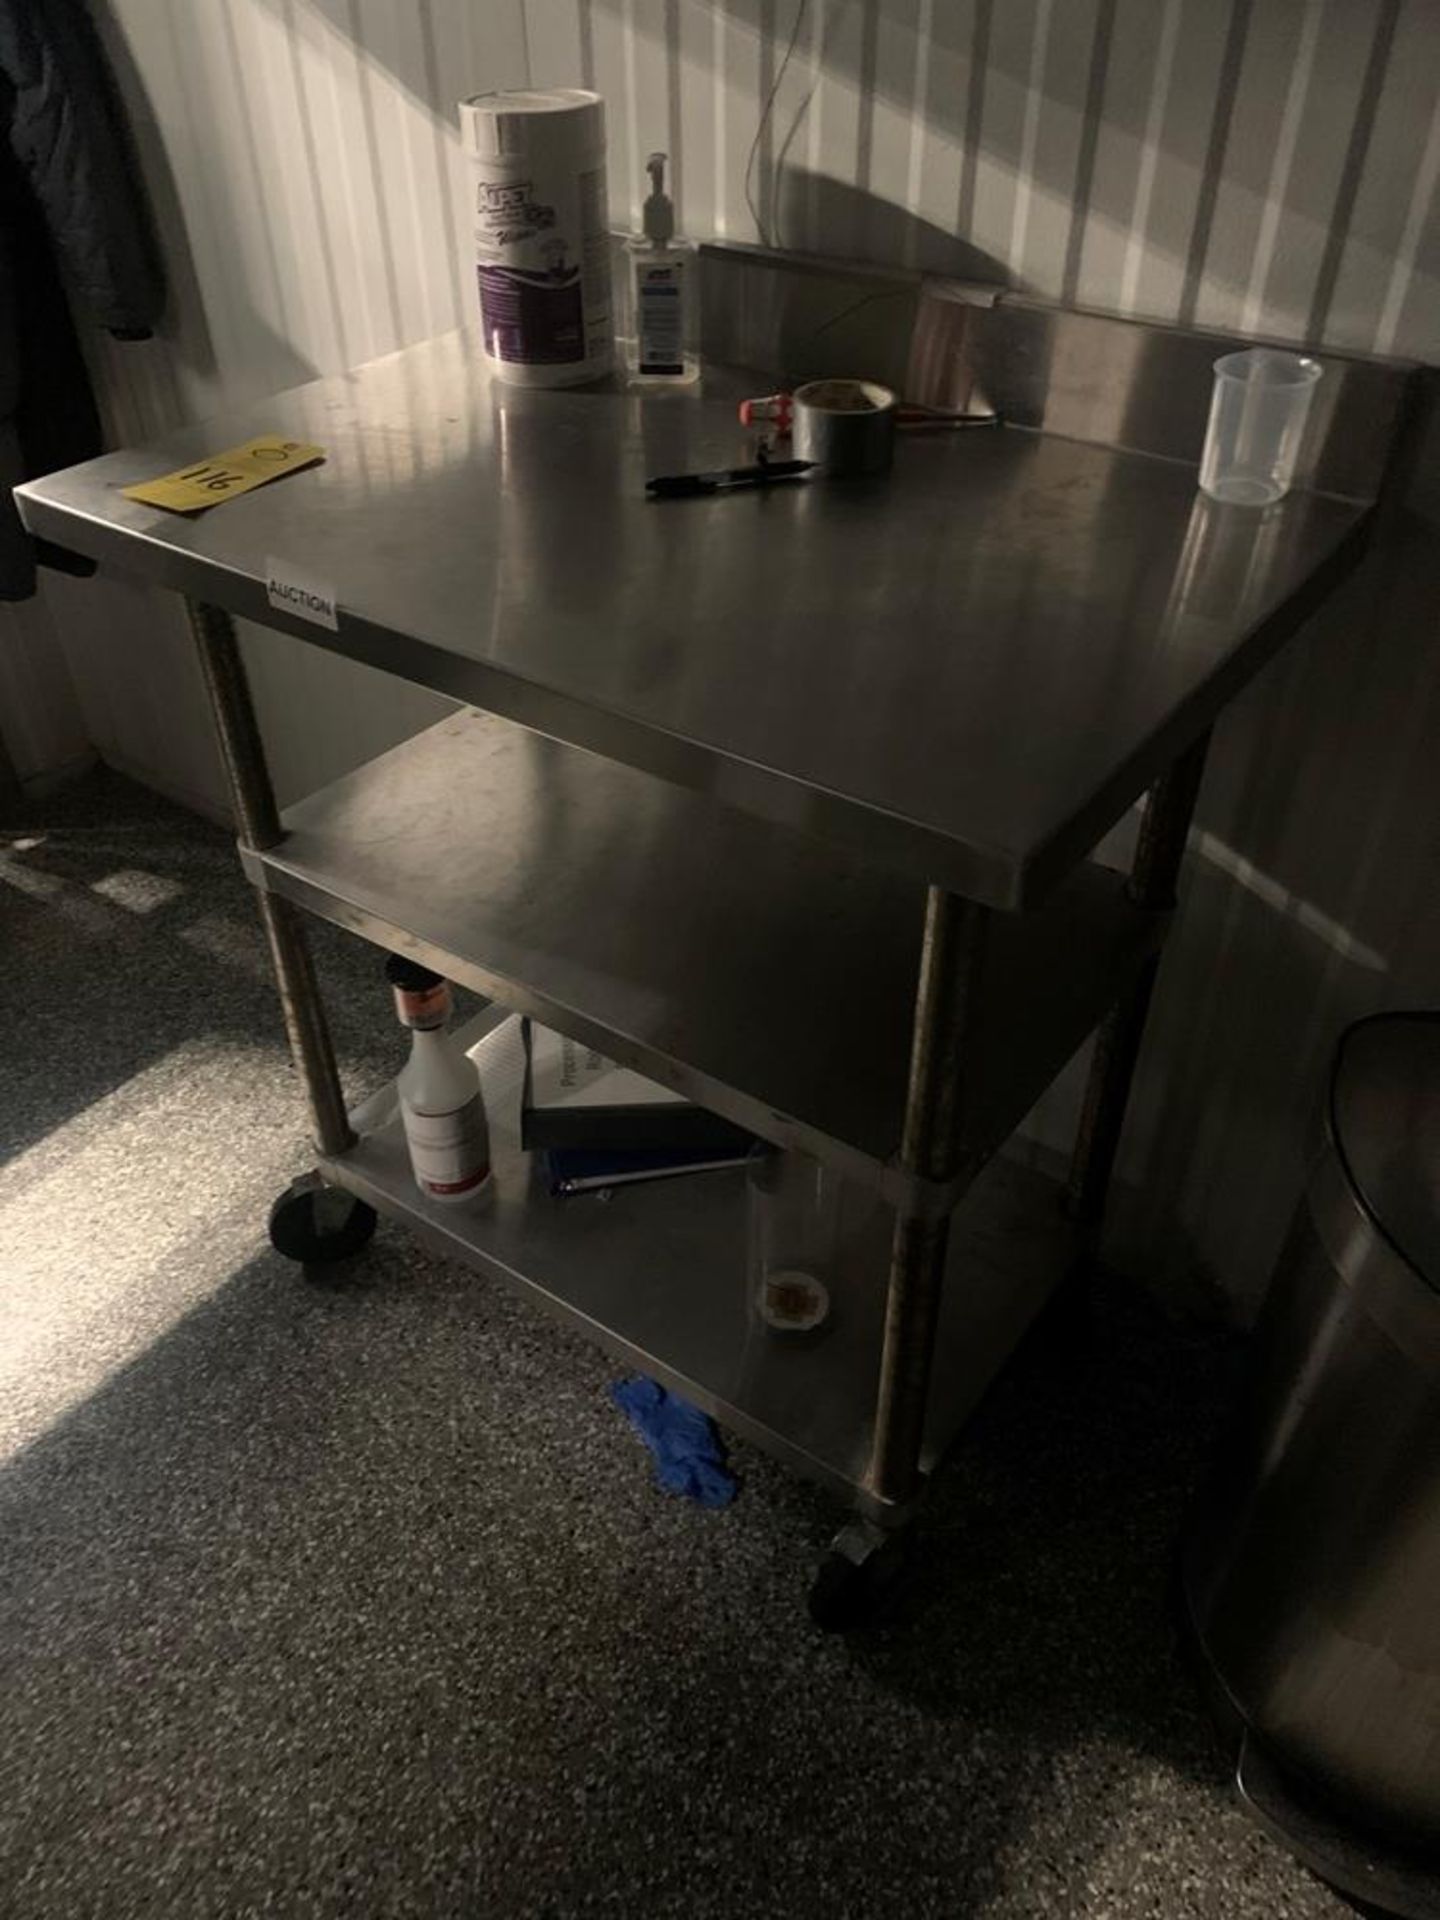 Stainless Steel Table with (2) shelves, 36" X 29" X 38.5" with 4" backsplash (Required Loading - Image 2 of 3